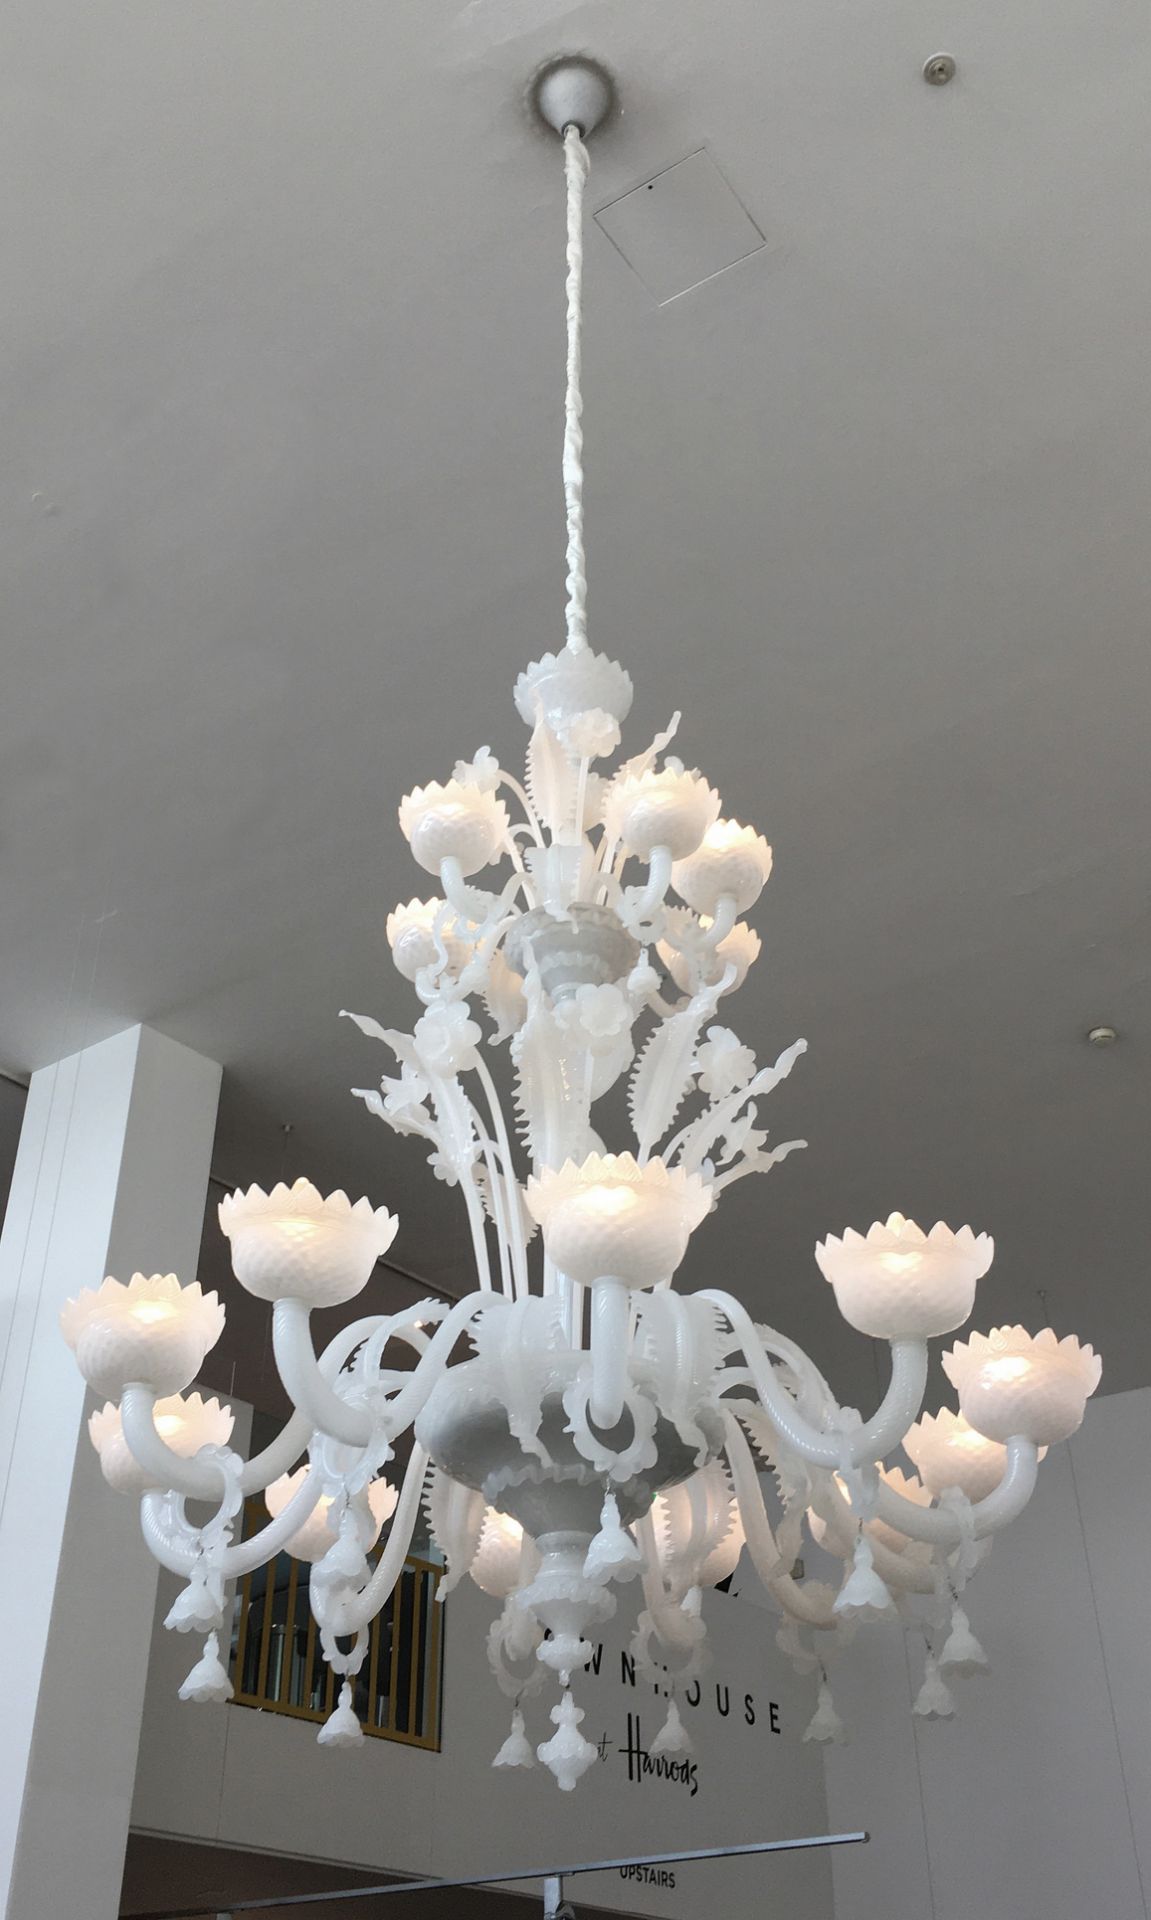 1 x Huge 1.8 Metre Tall Handcrafted 18-Arm Opal Glass Chandelier - Stunning Piece - Ref: MHB139 - Image 2 of 9